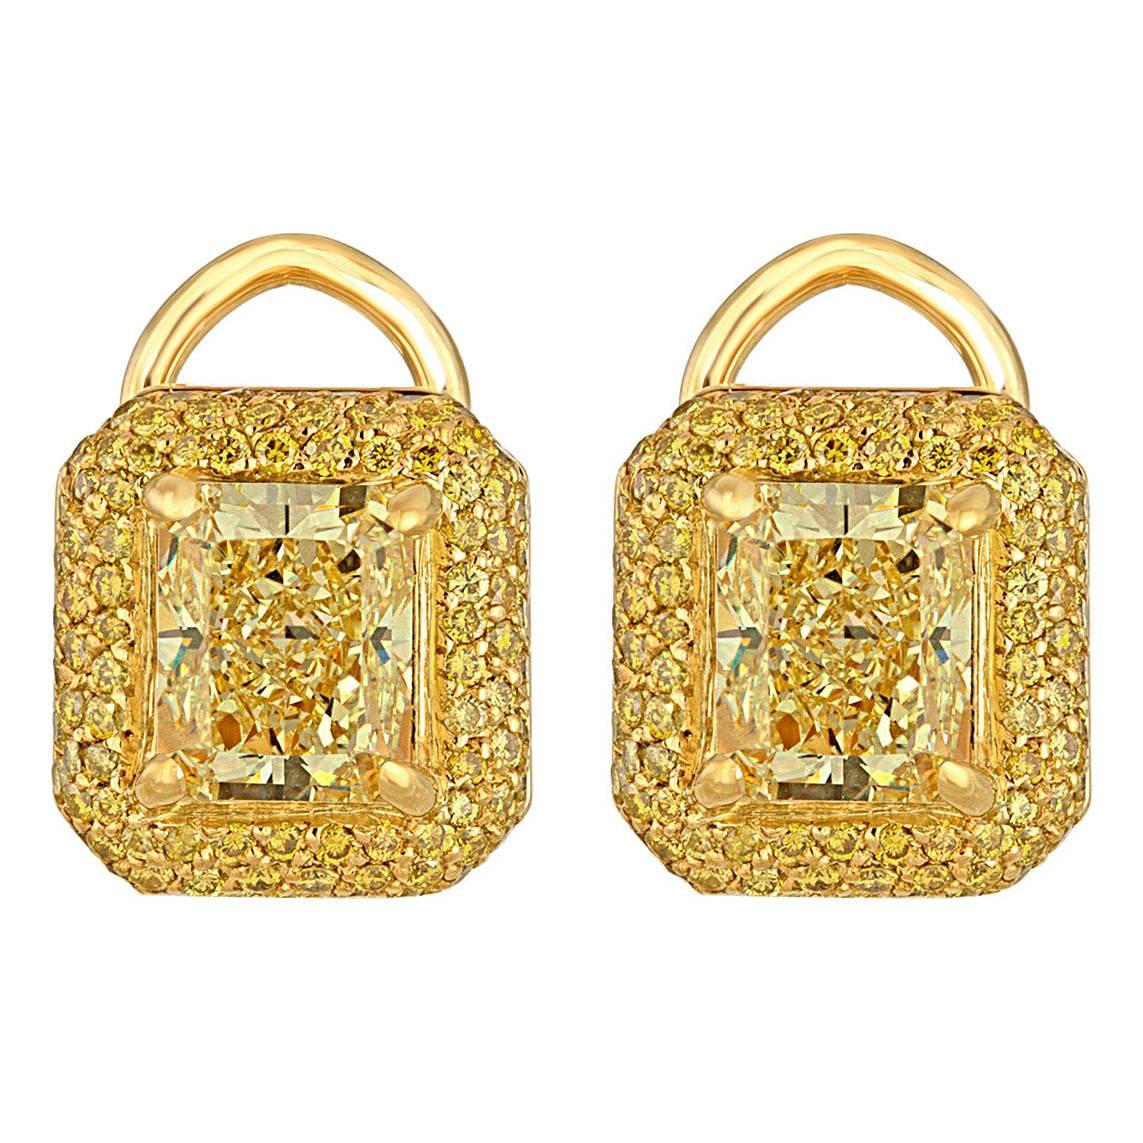 Two Yellow Radiant Diamonds Set in Gold Earring Mountings